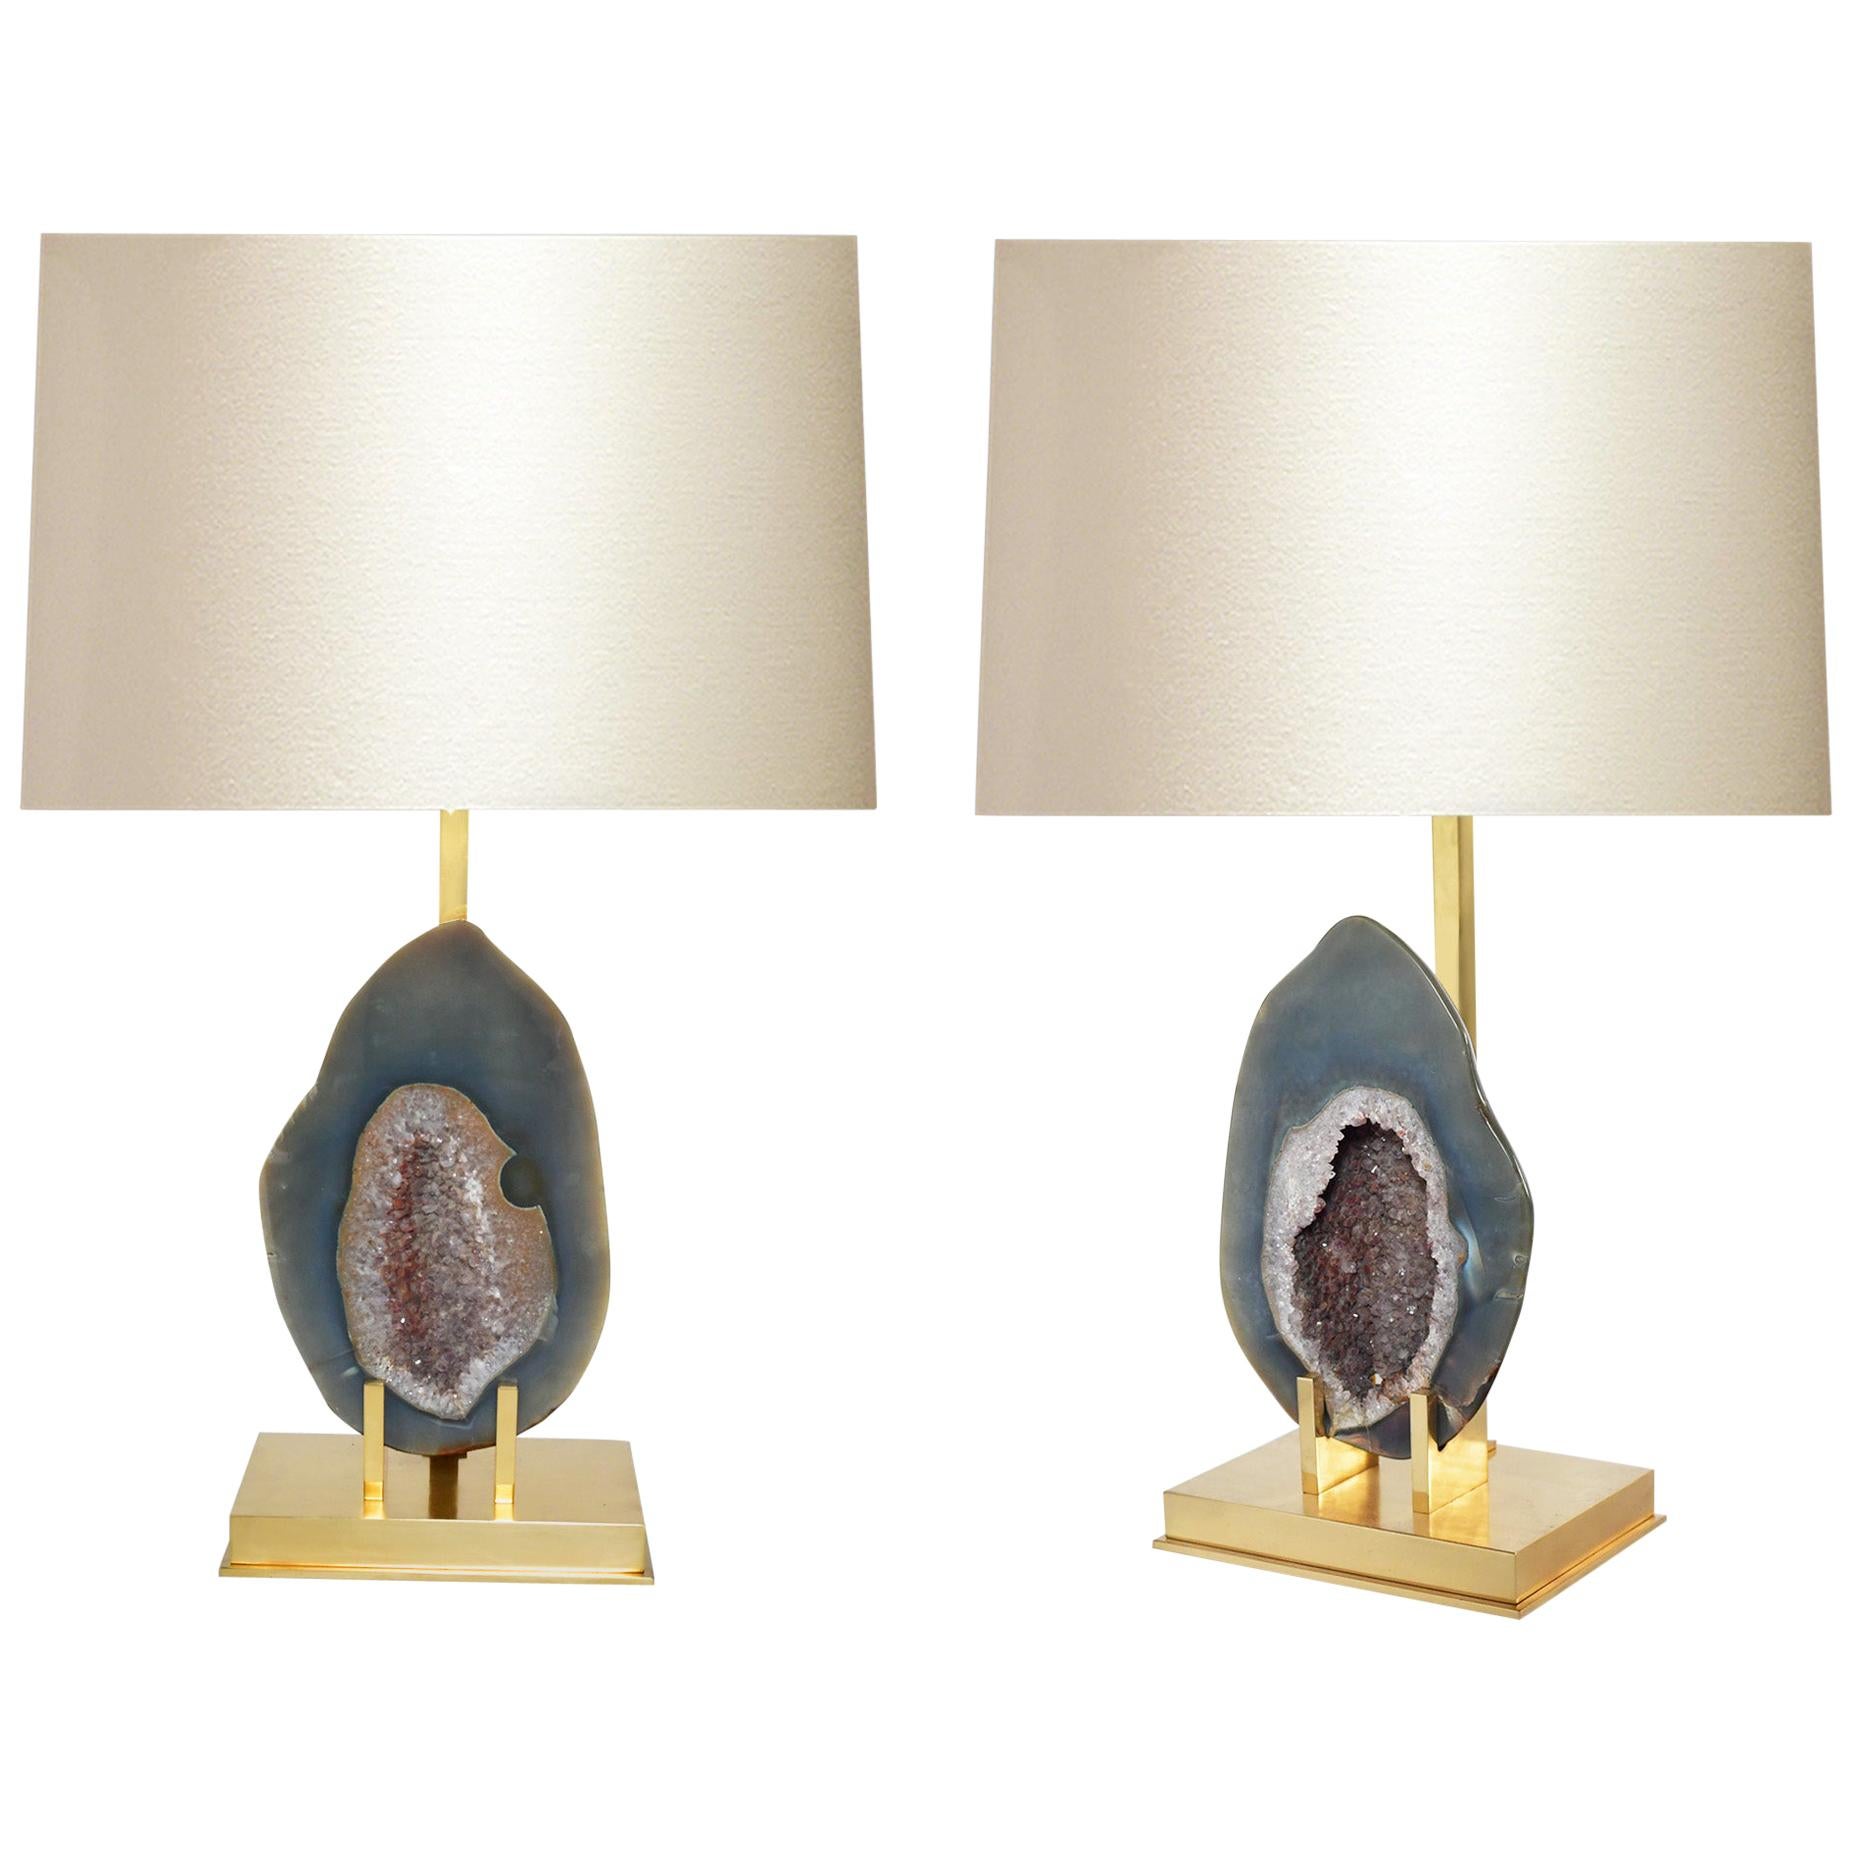 What does an agate lamp do?